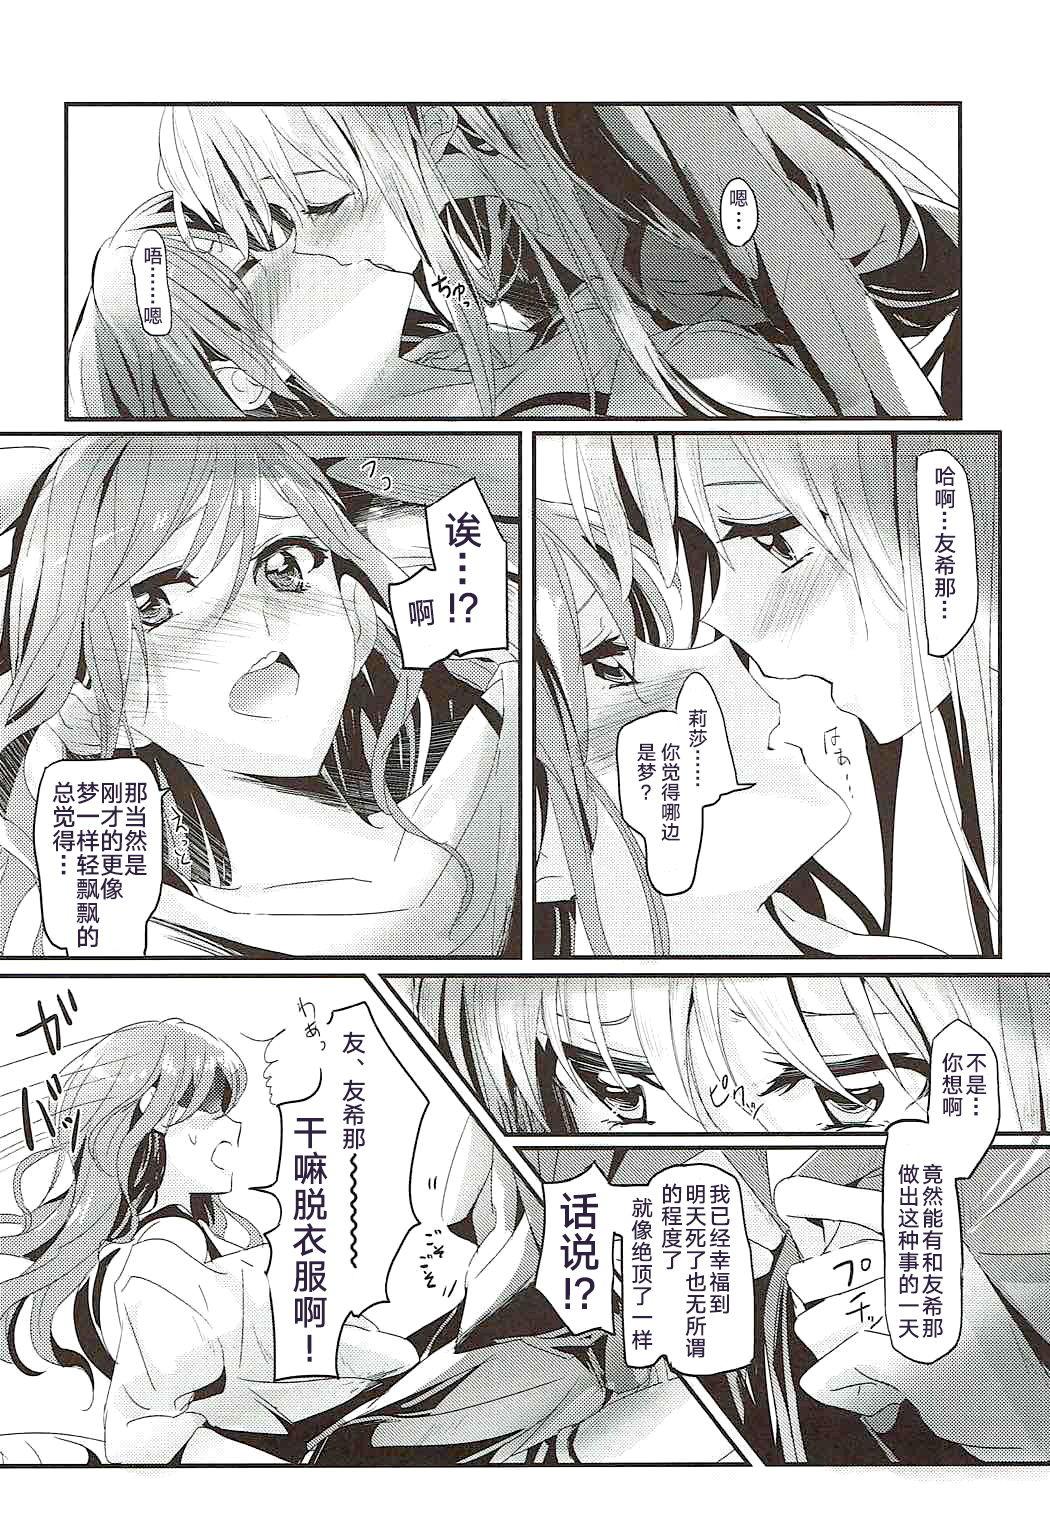 Pussyfucking Unstable feelings - Bang dream Extreme - Page 11